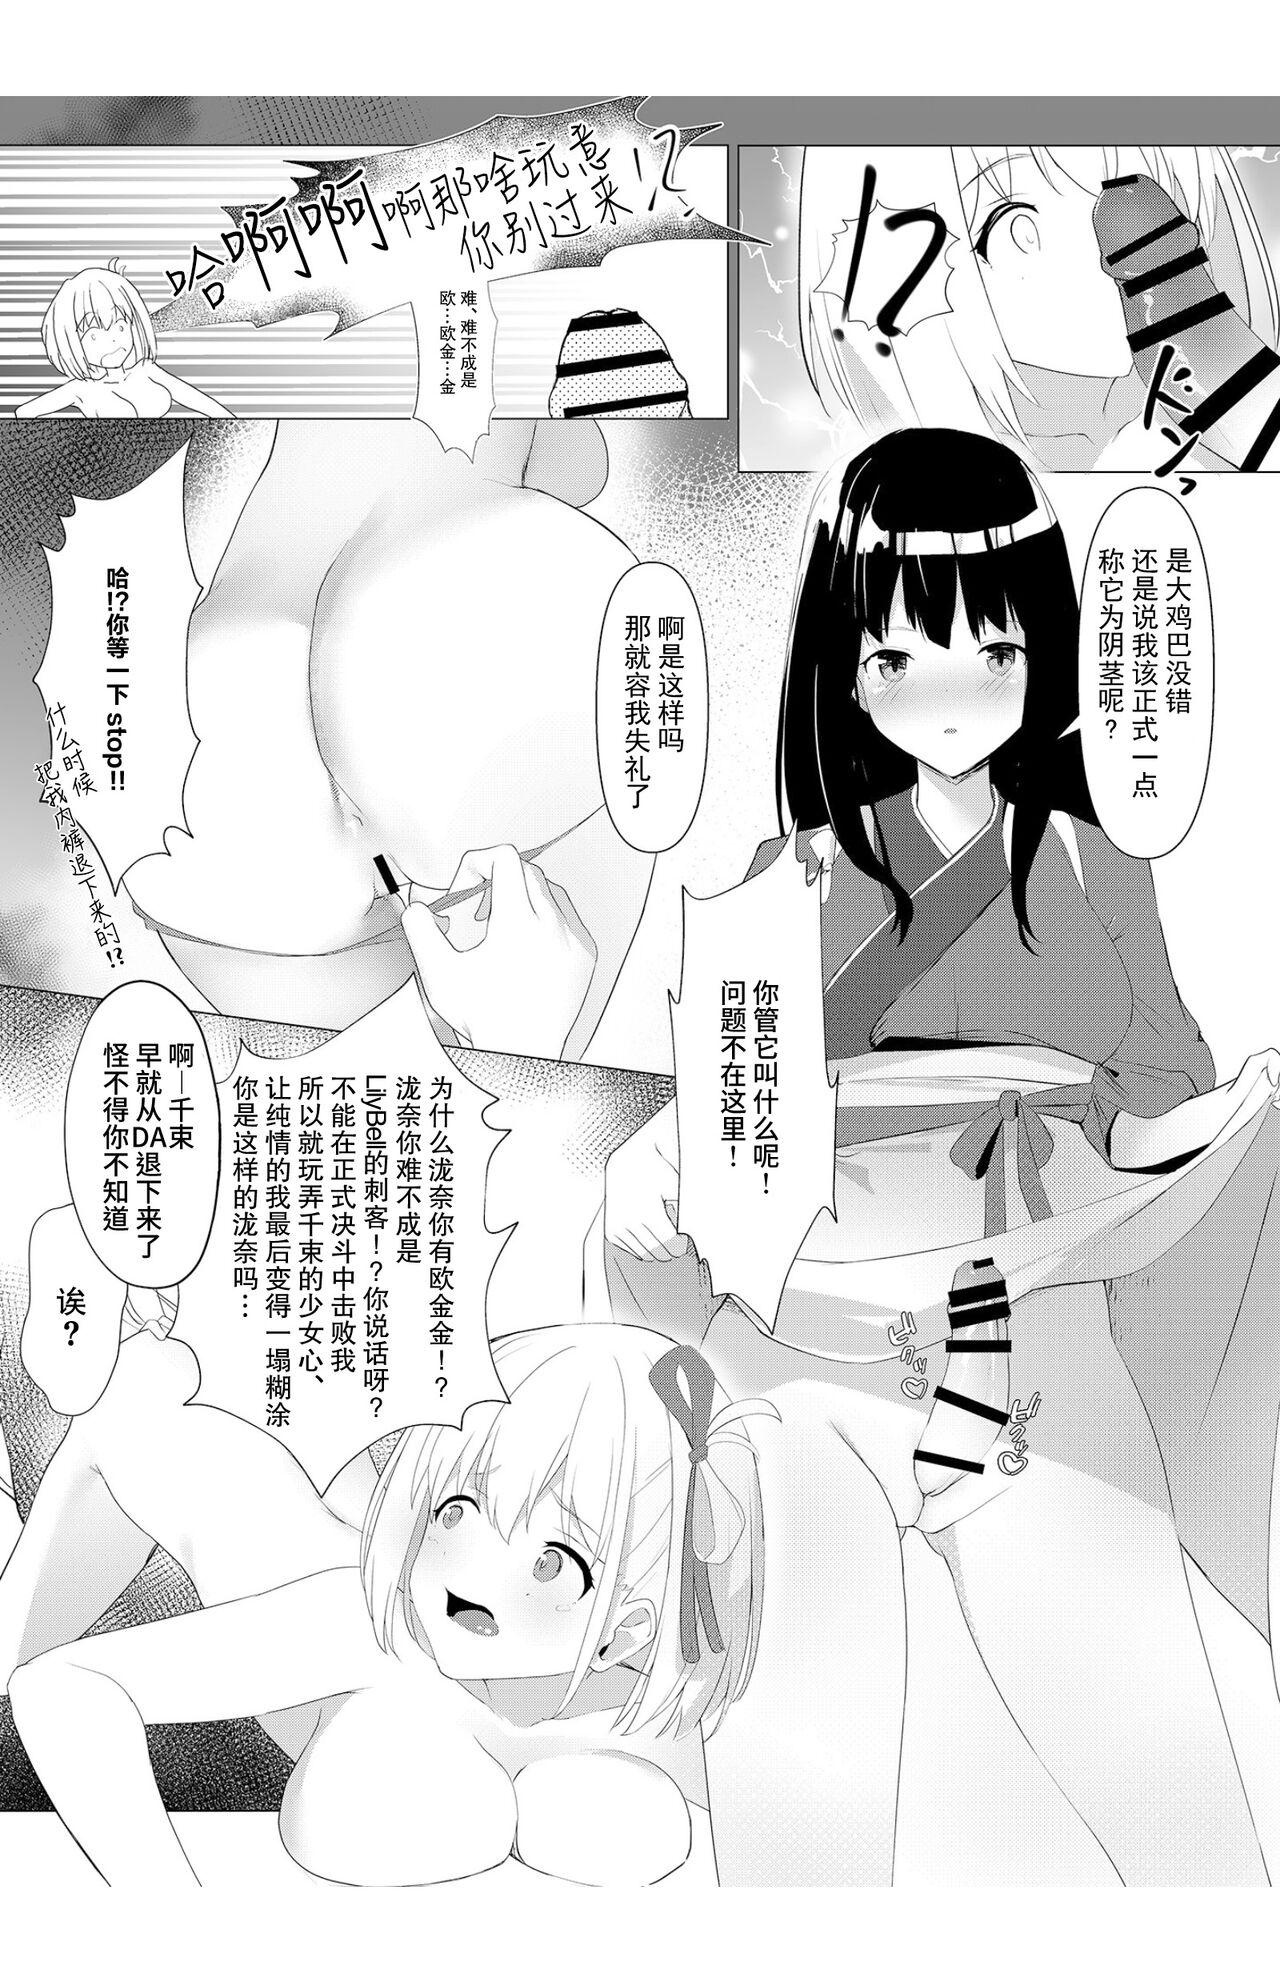 Ball Licking Kimi no Heartbeat | 你的心跳 heart beat - Lycoris recoil Relax - Page 9